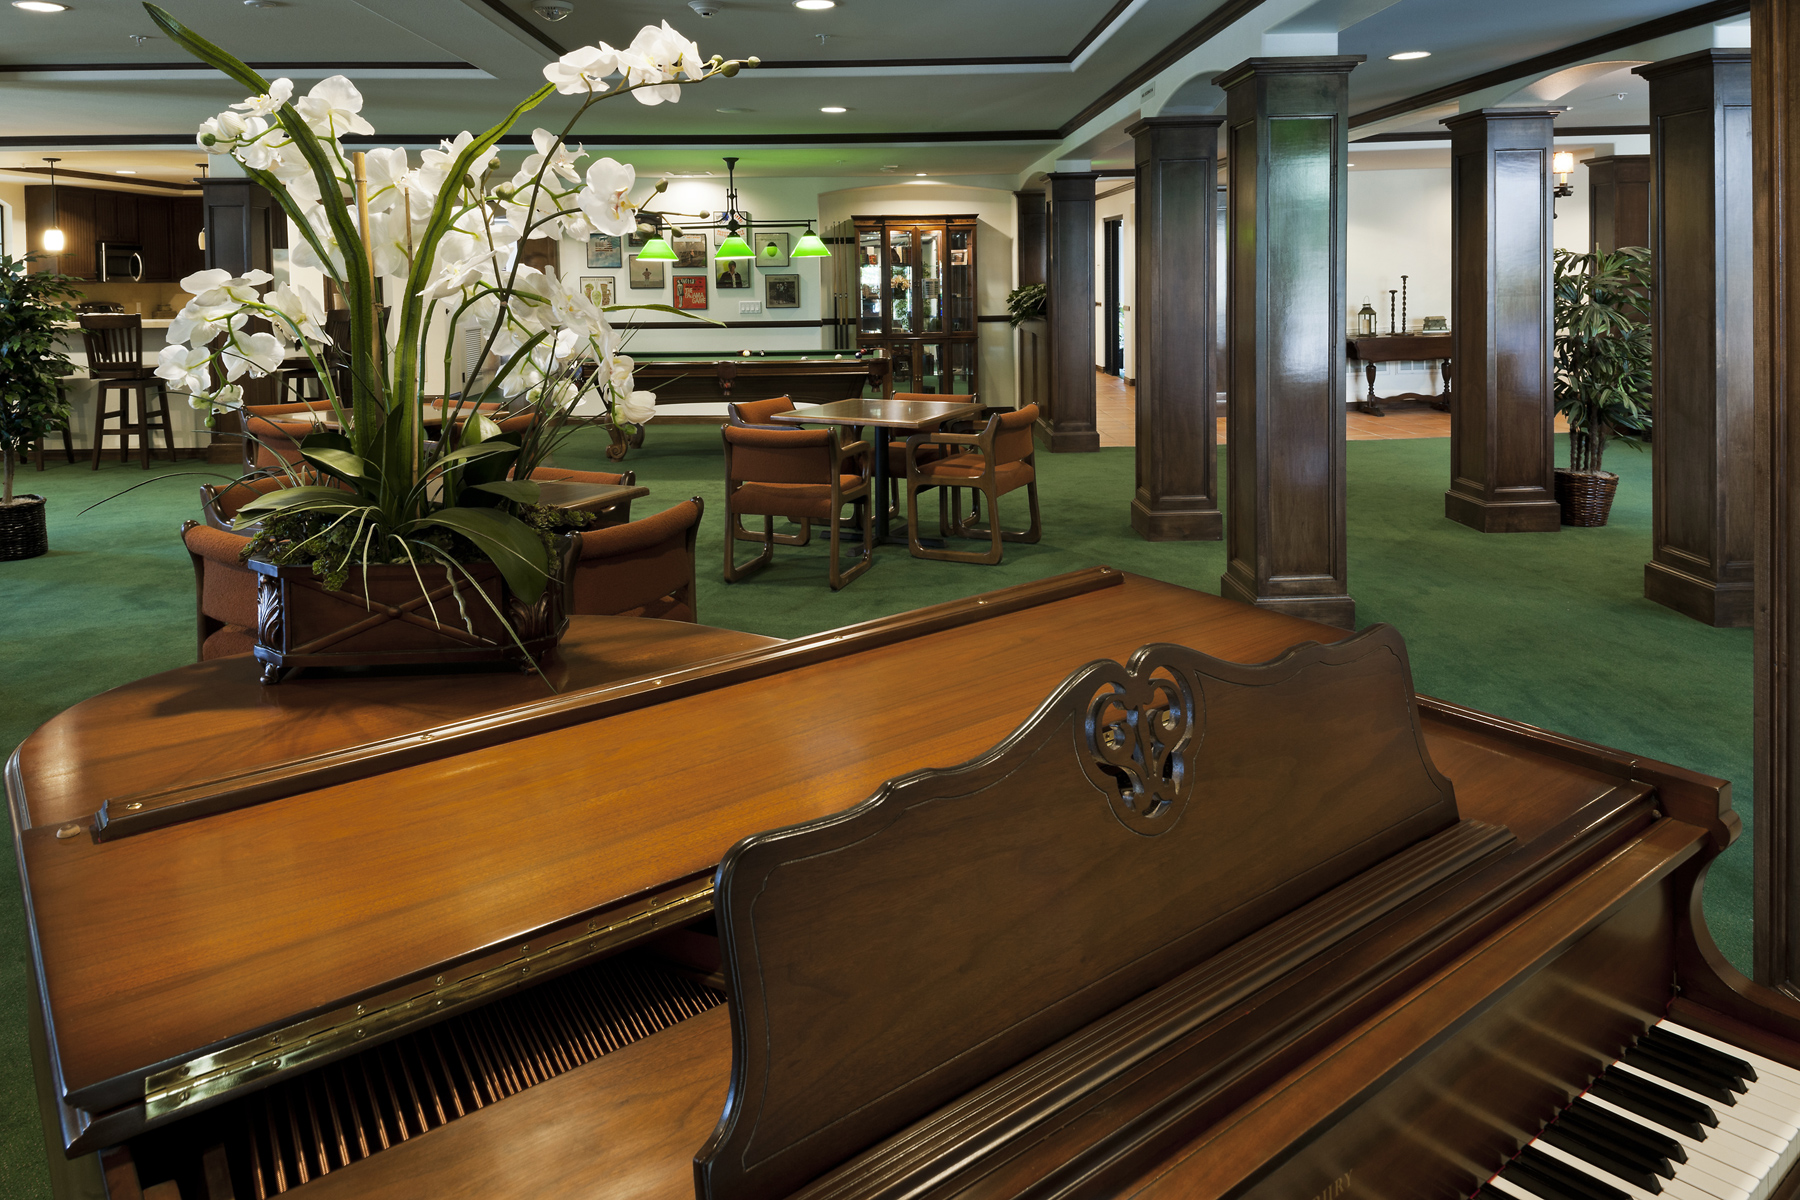 Canby woods housing community room. room wood with green carpet, several brown wood seating and tables, grand piano, plants throughout room, painting on wall. Large pillars and recessed lighting